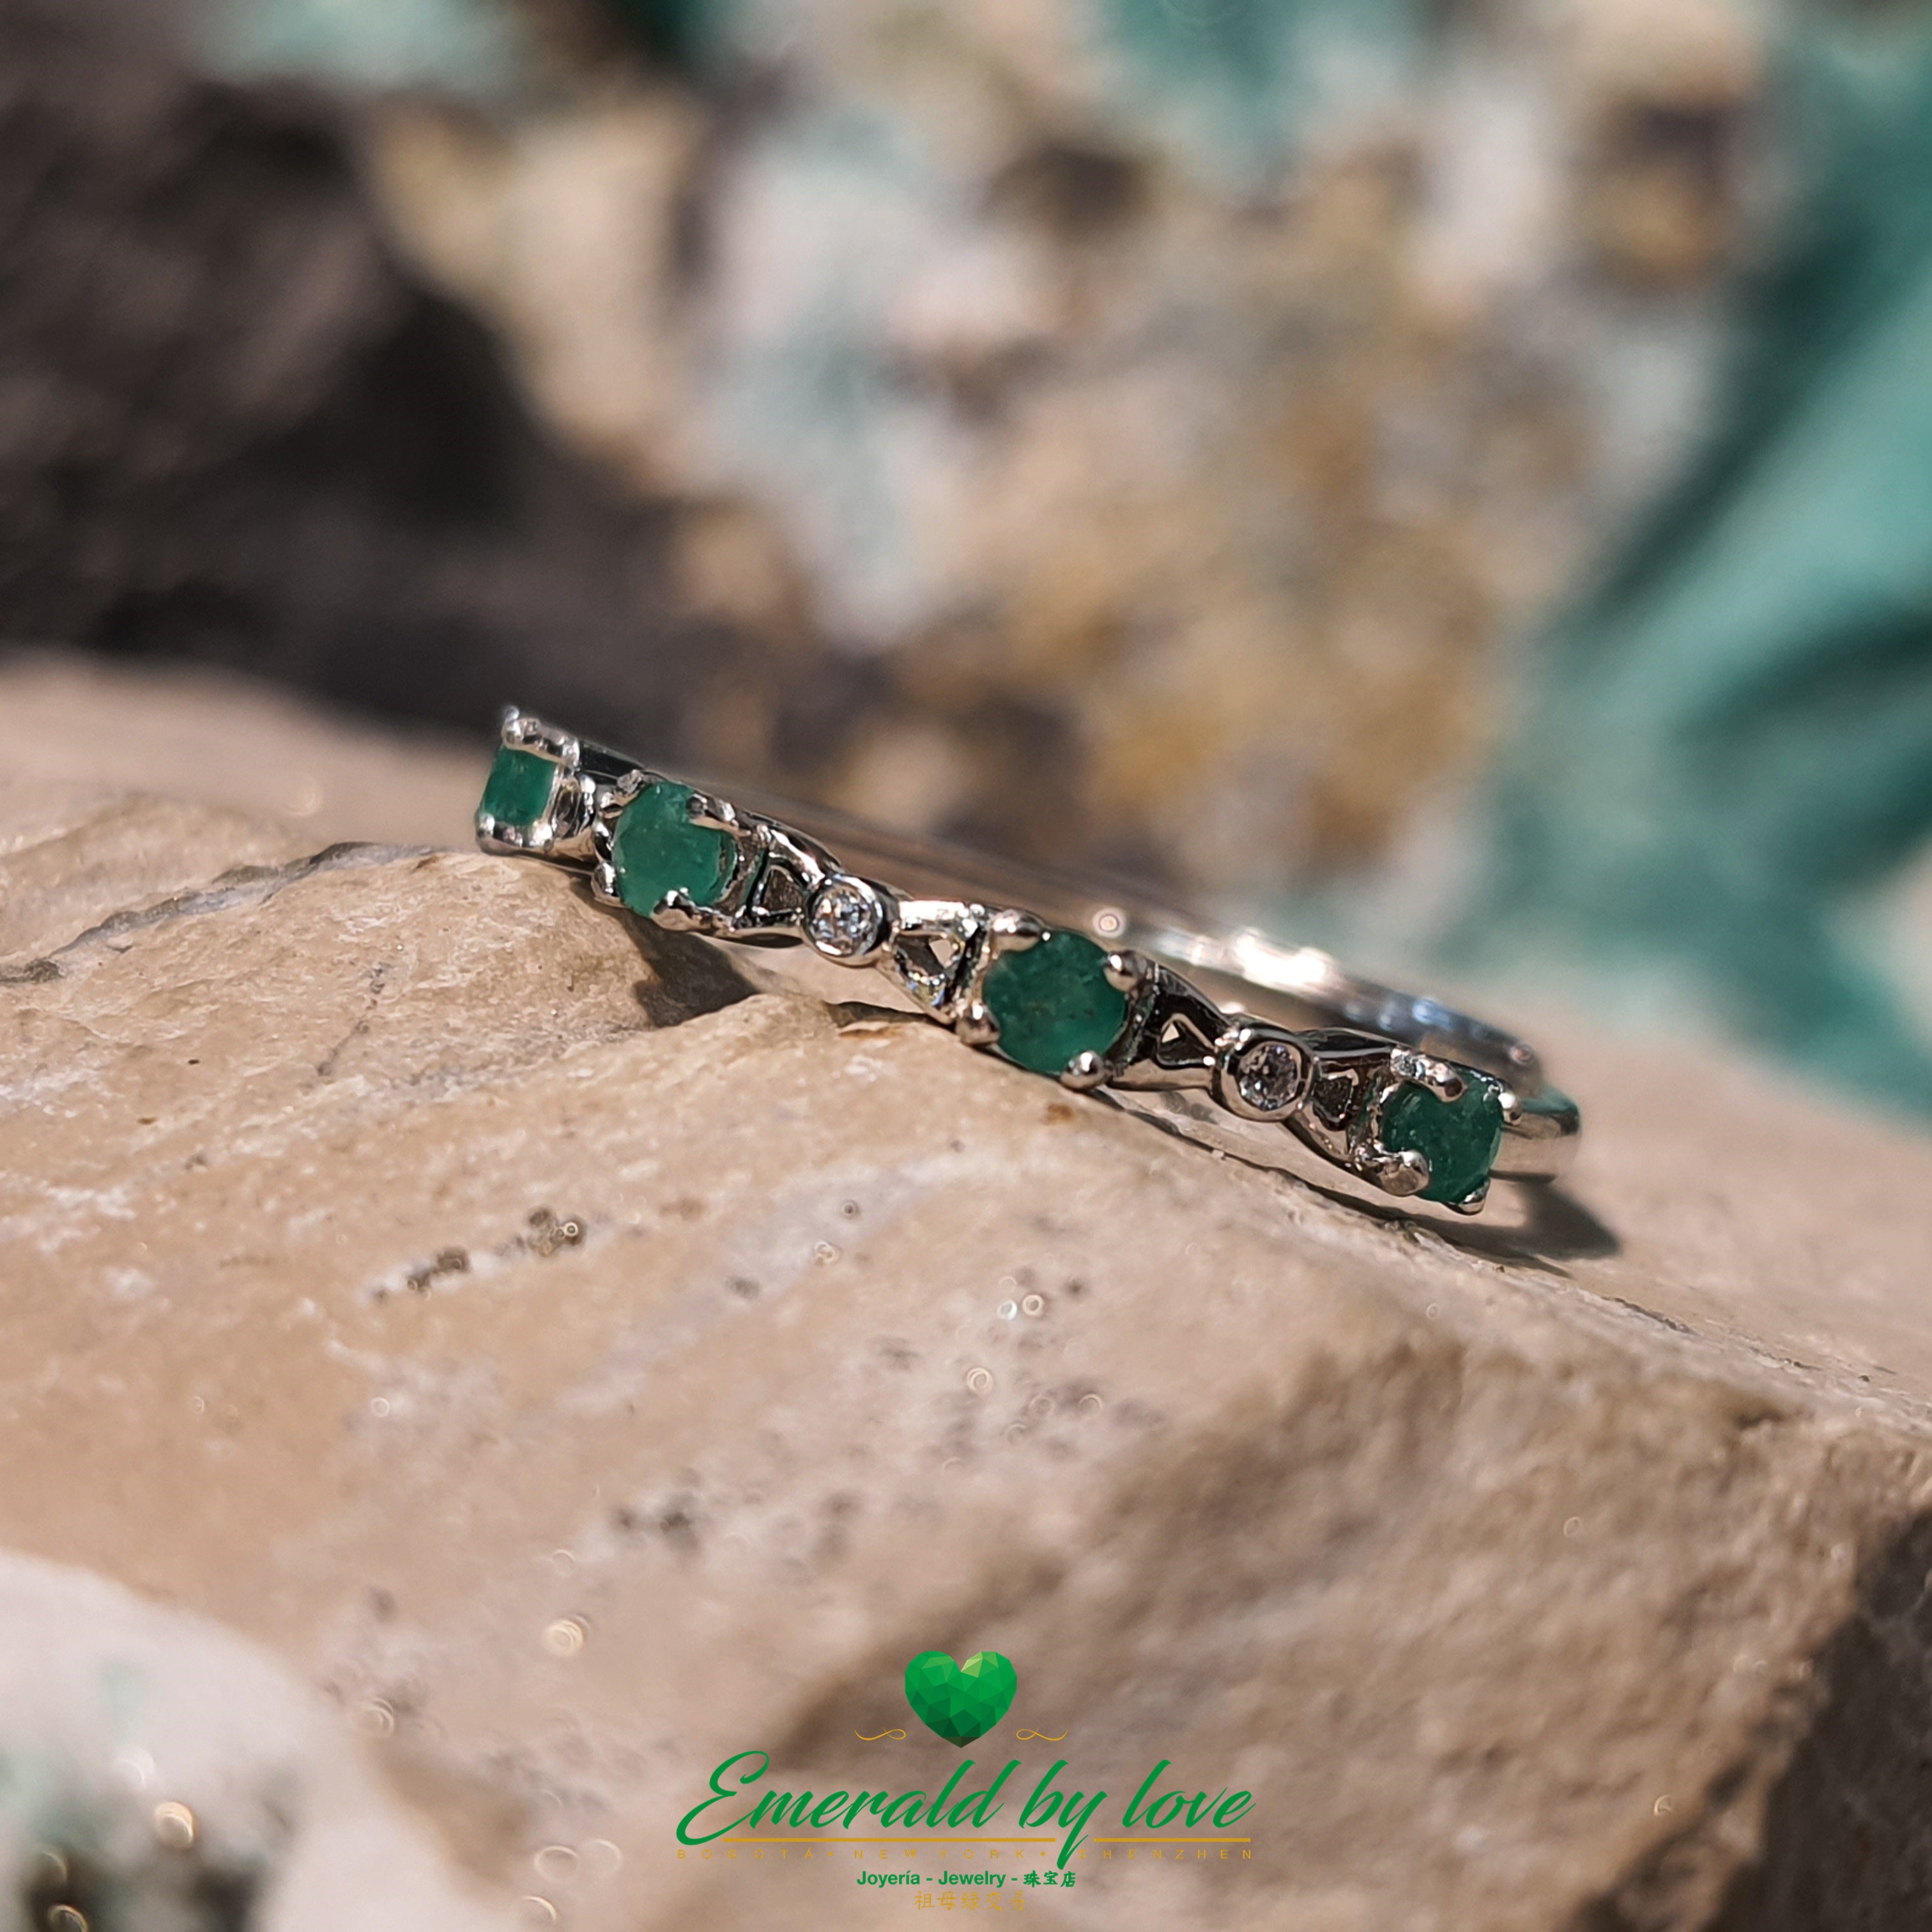 Minimalist Band Ring with Tiny Round Emeralds Connected by Triangular Bow Details